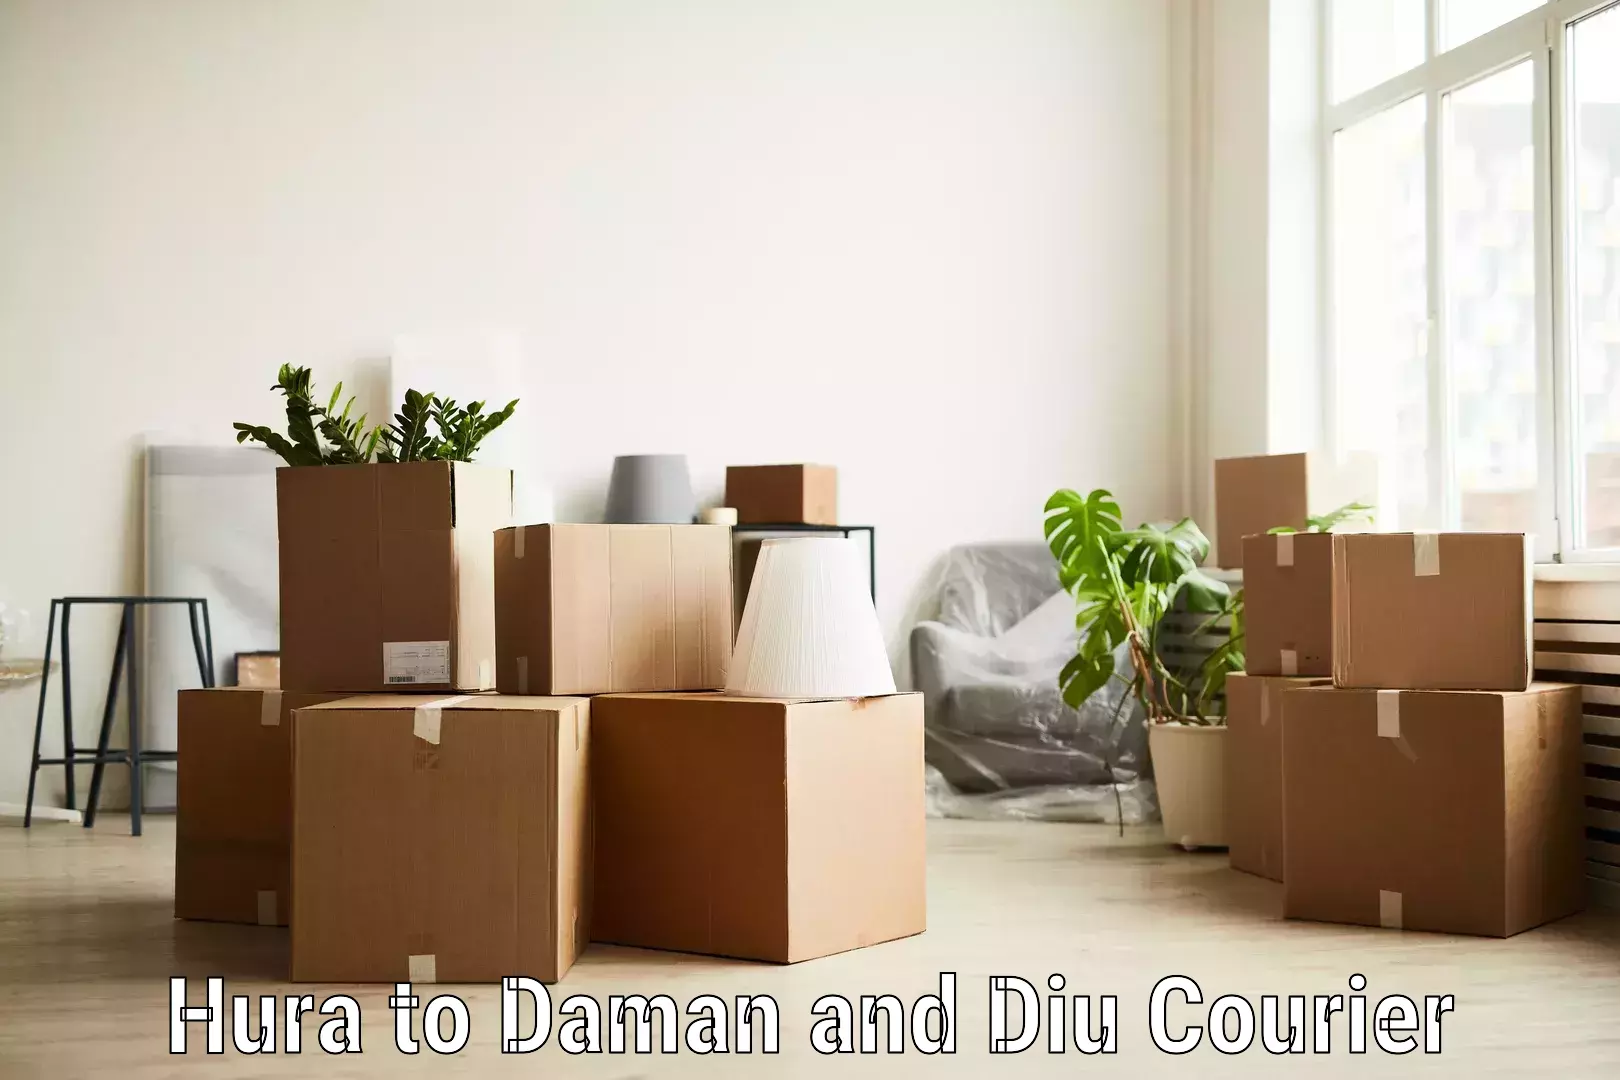 Fast delivery service Hura to Daman and Diu